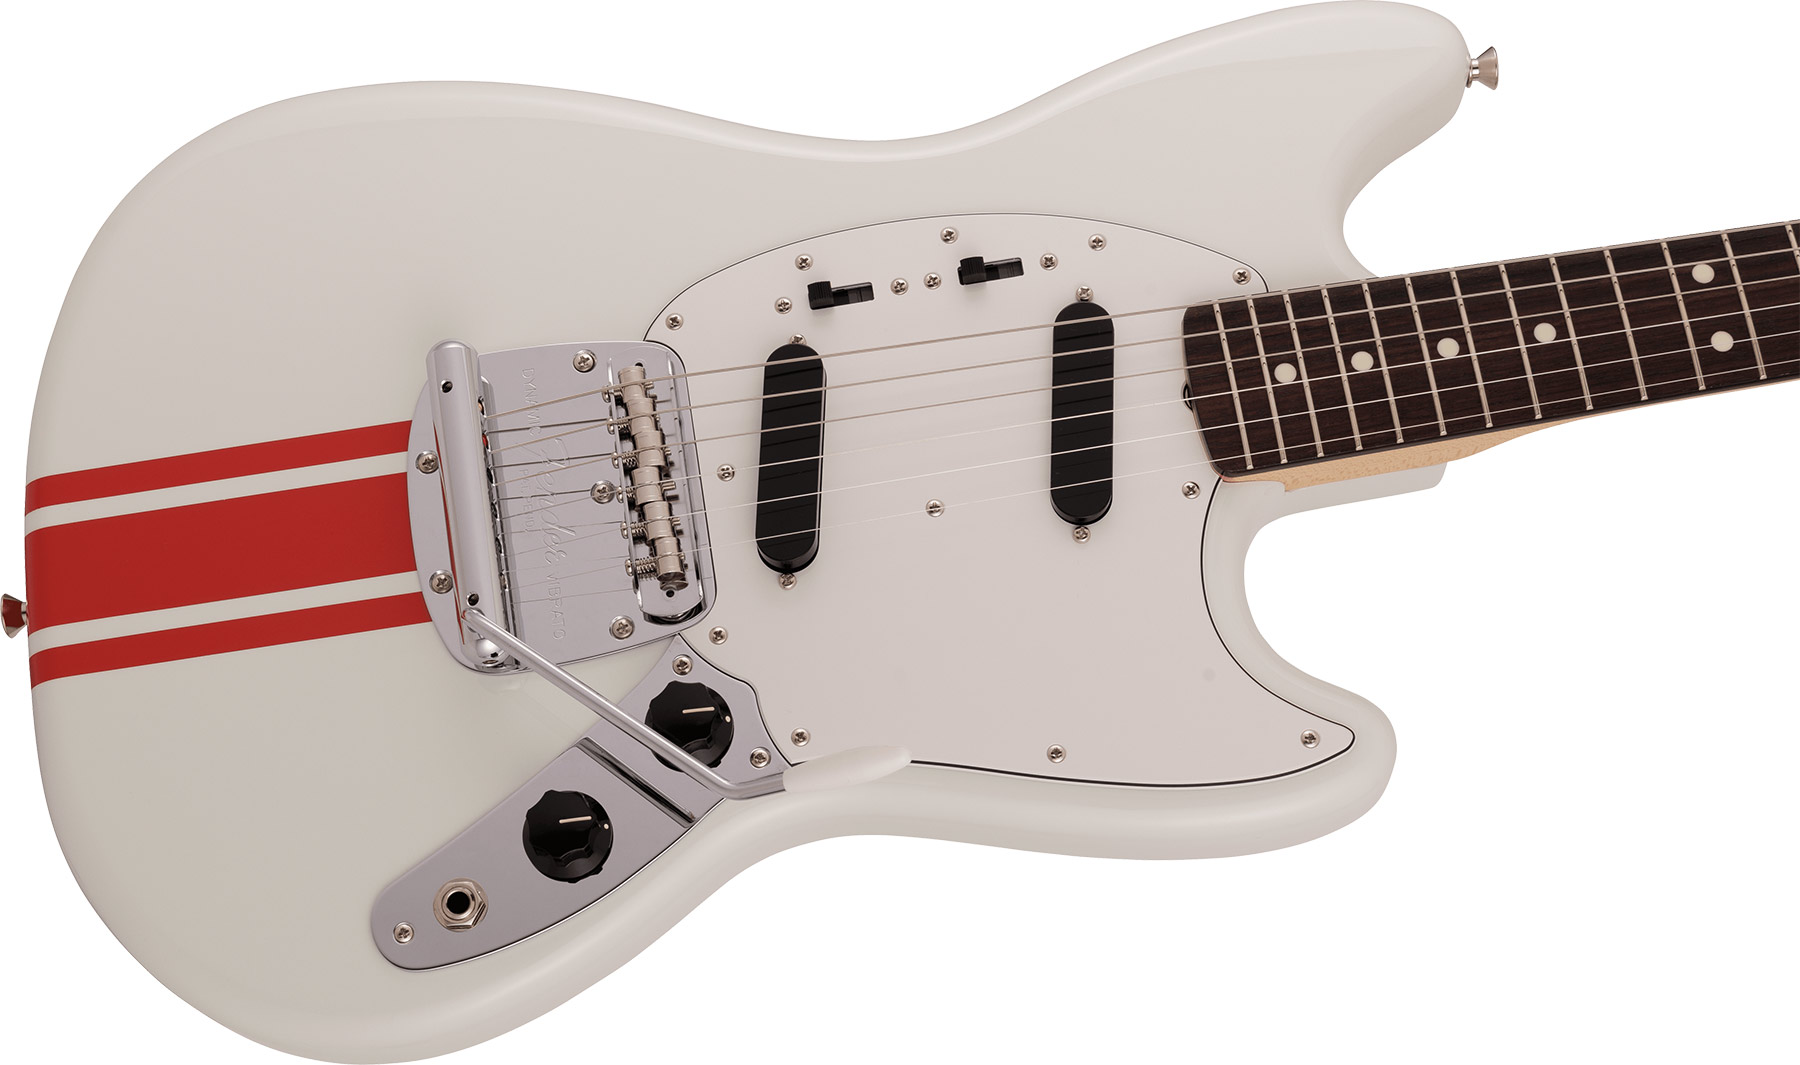 Fender Mustang Traditional 60s Mij Jap 2s Trem Rw - Olympic White W/ Red Competition Stripe - Retro rock electric guitar - Variation 2